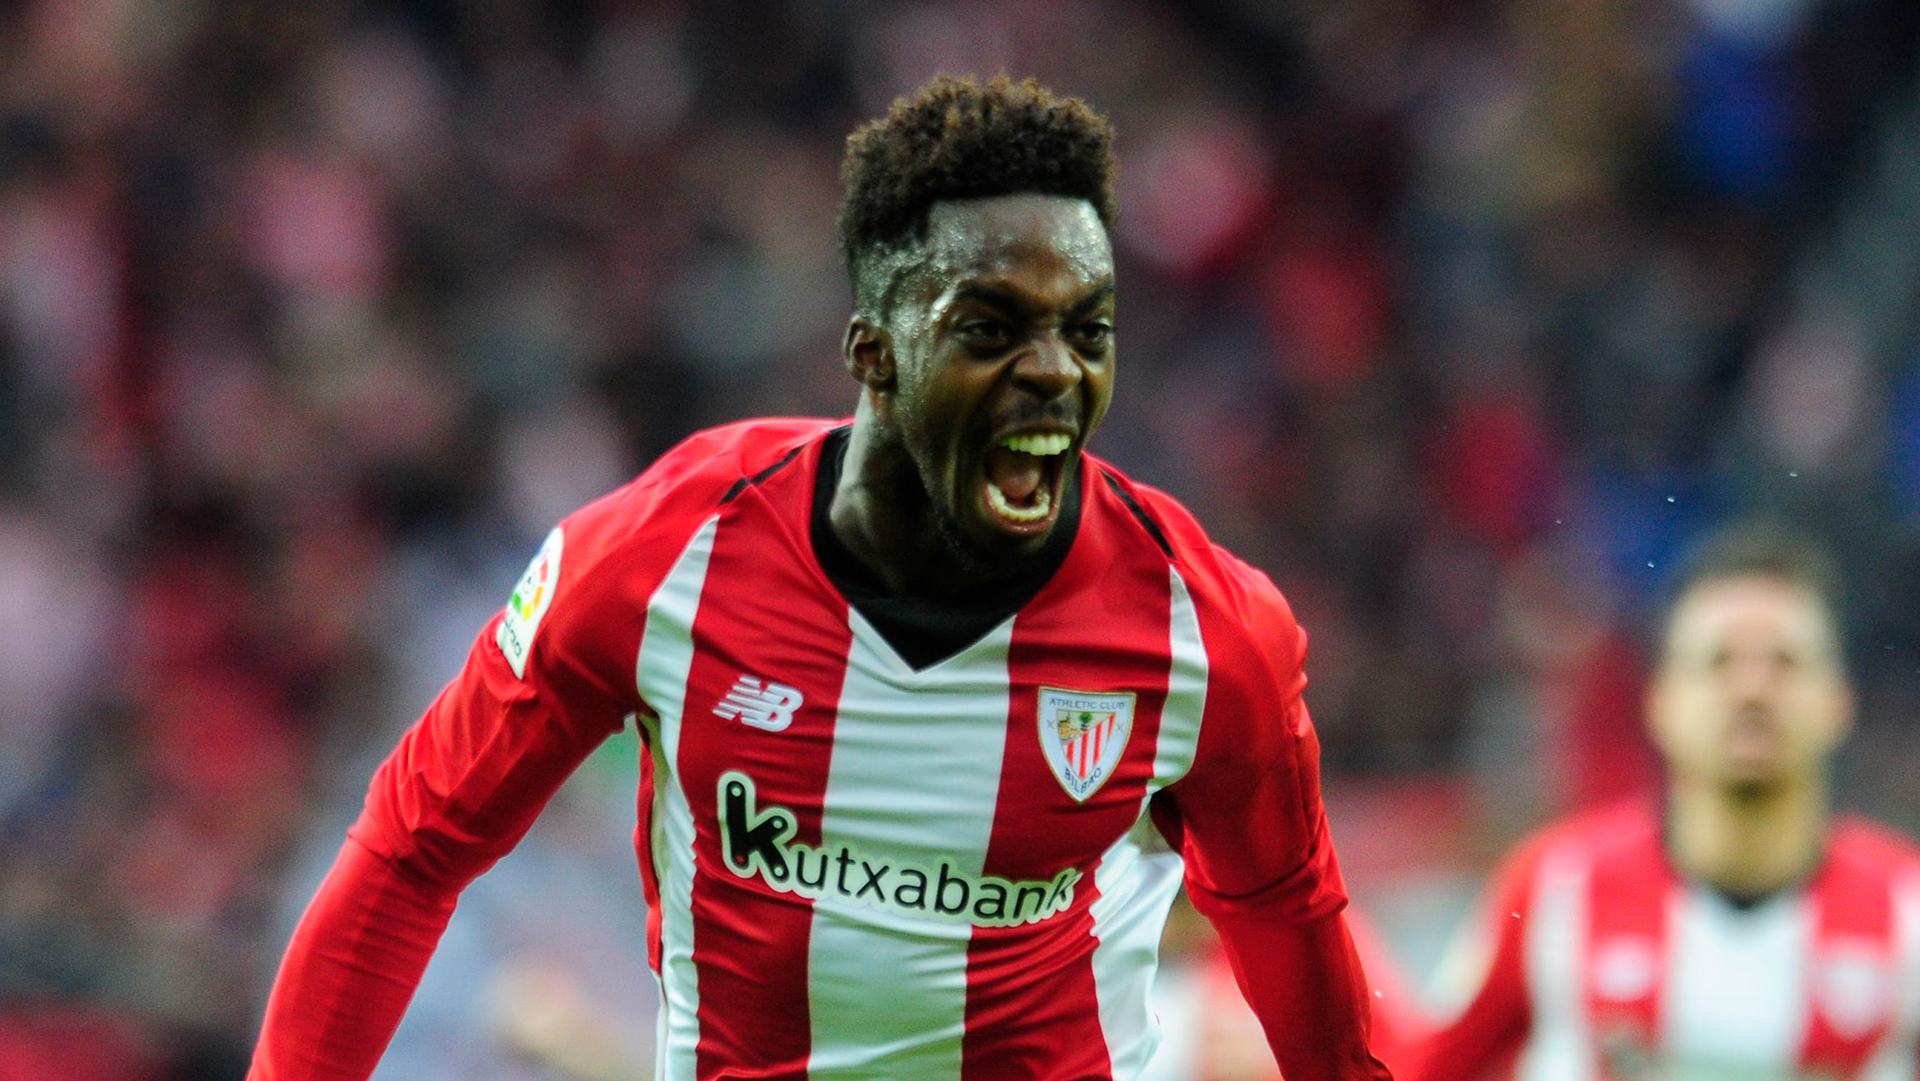 Williams, key player in the previous Athletic-Sevilla